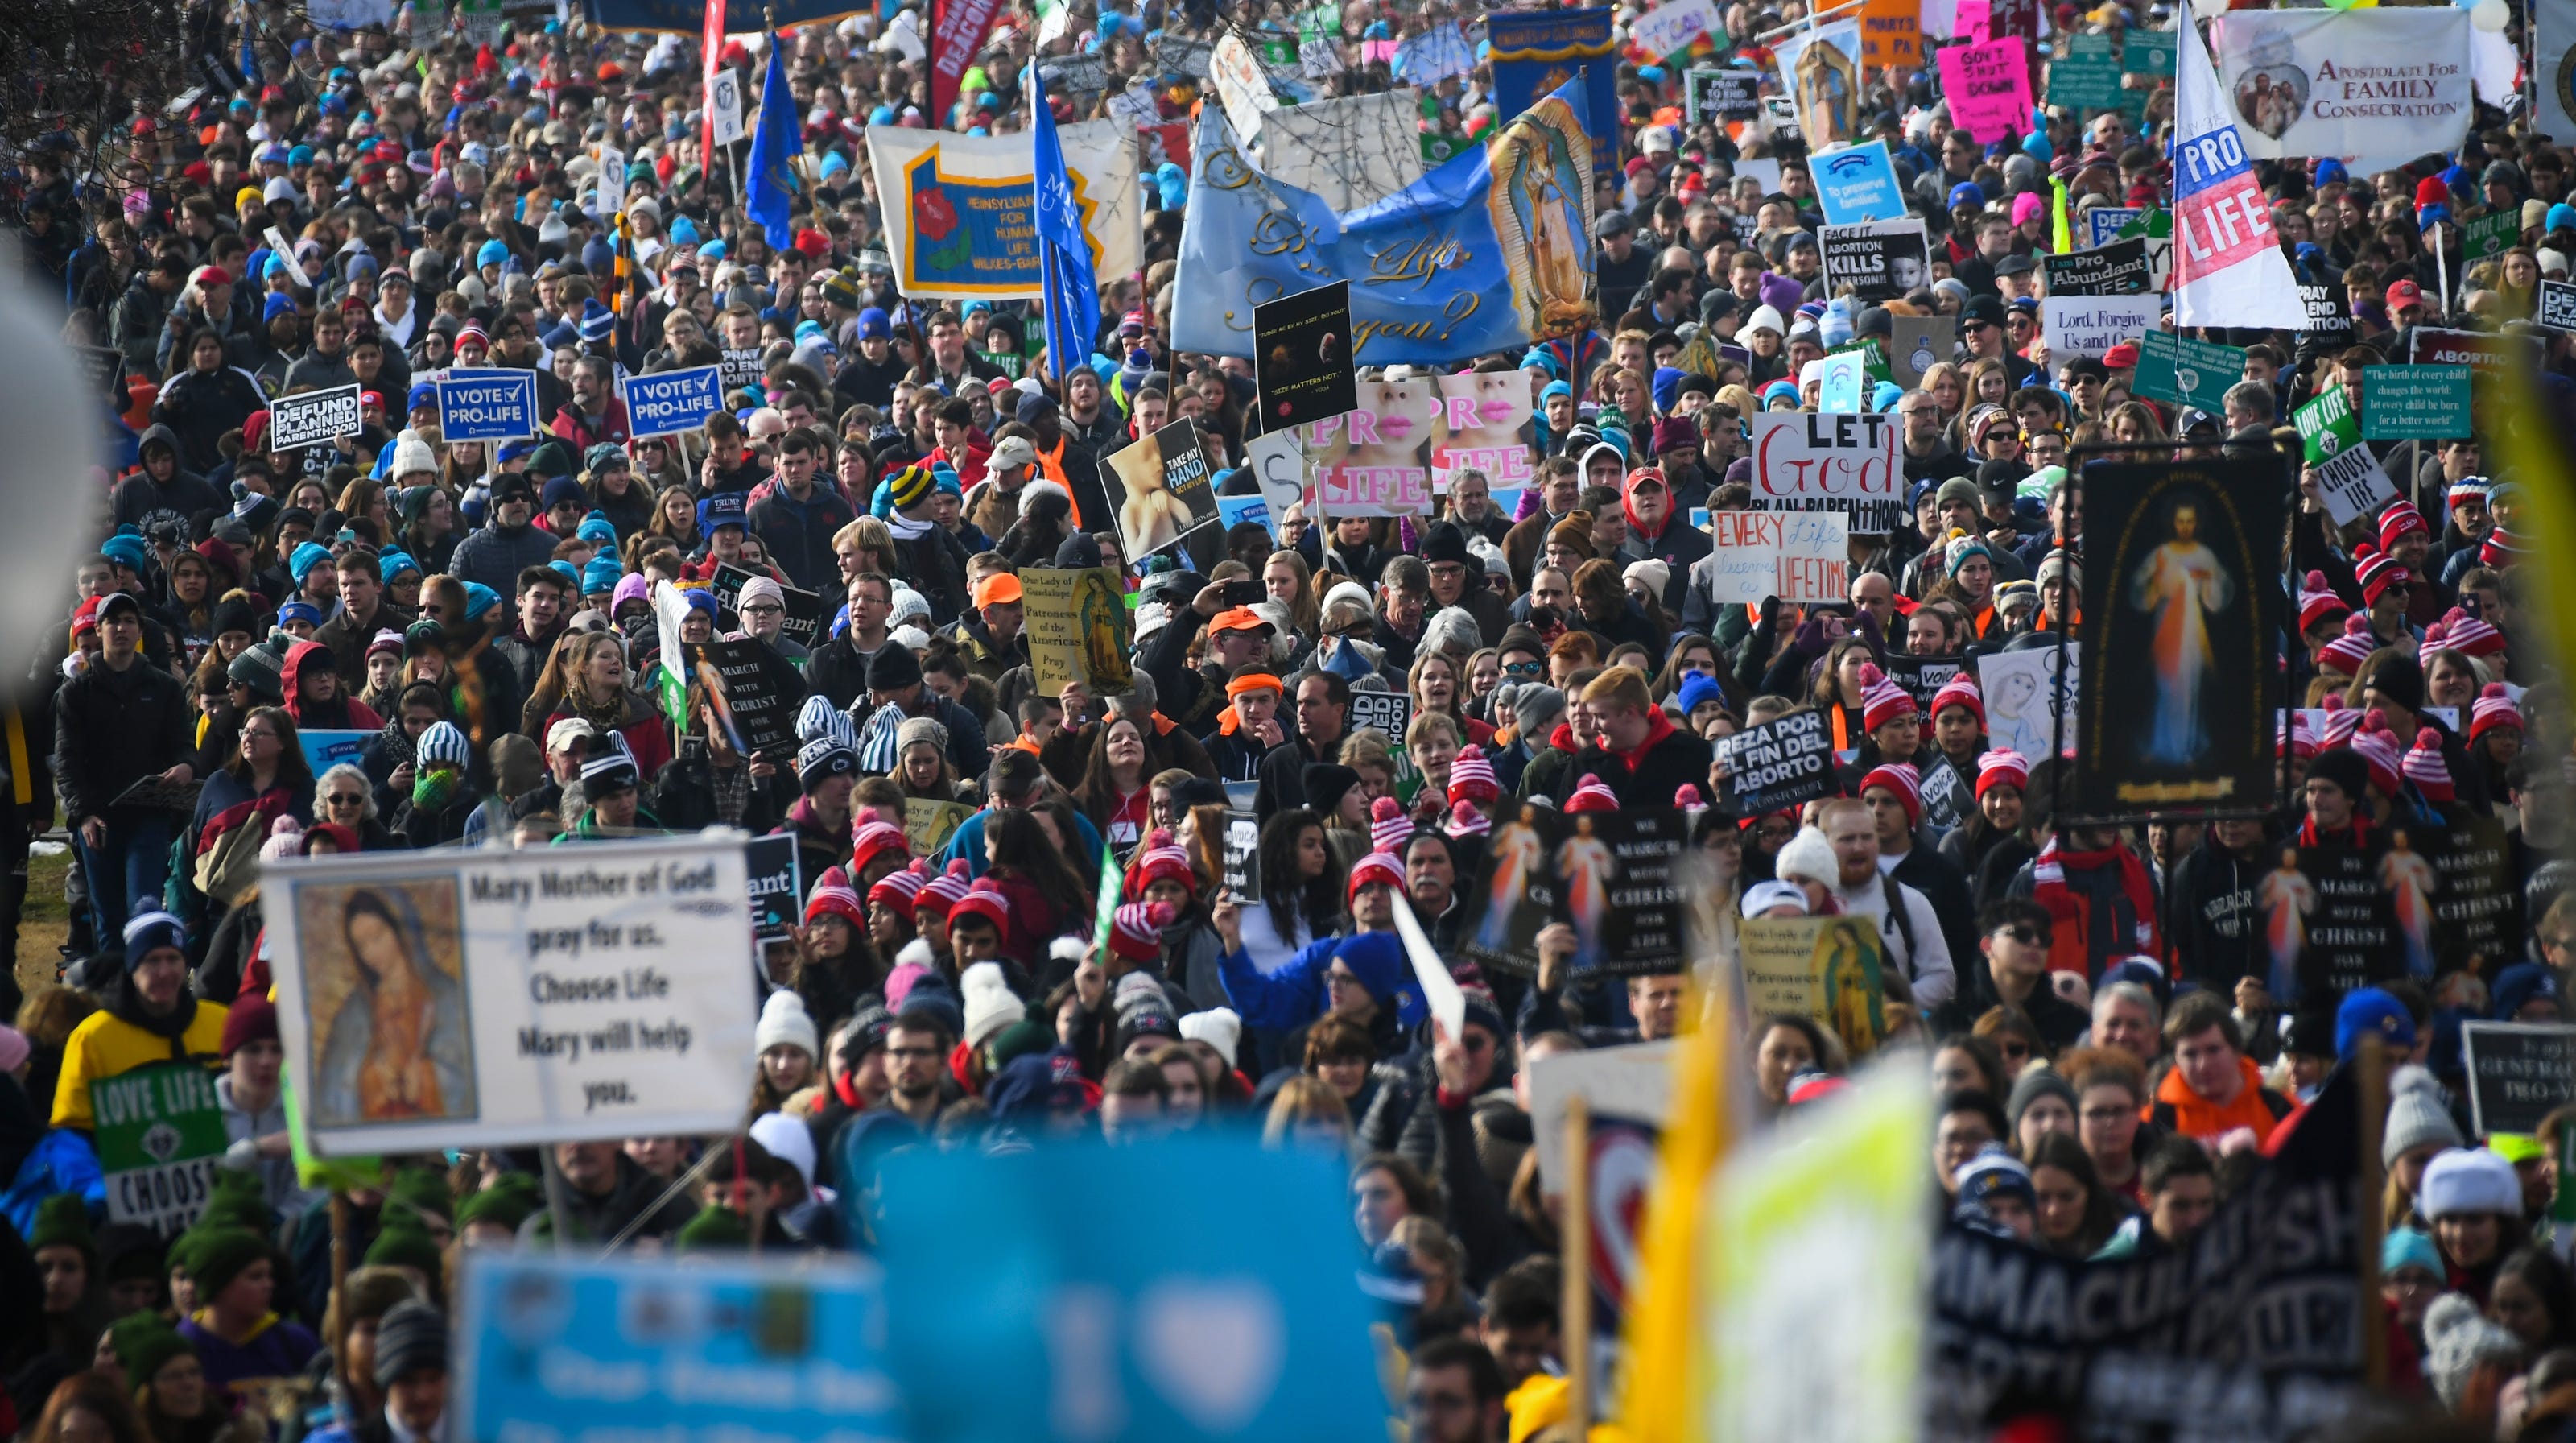 March for Life 2019 Vice President Mike Pence, thousands attend rally